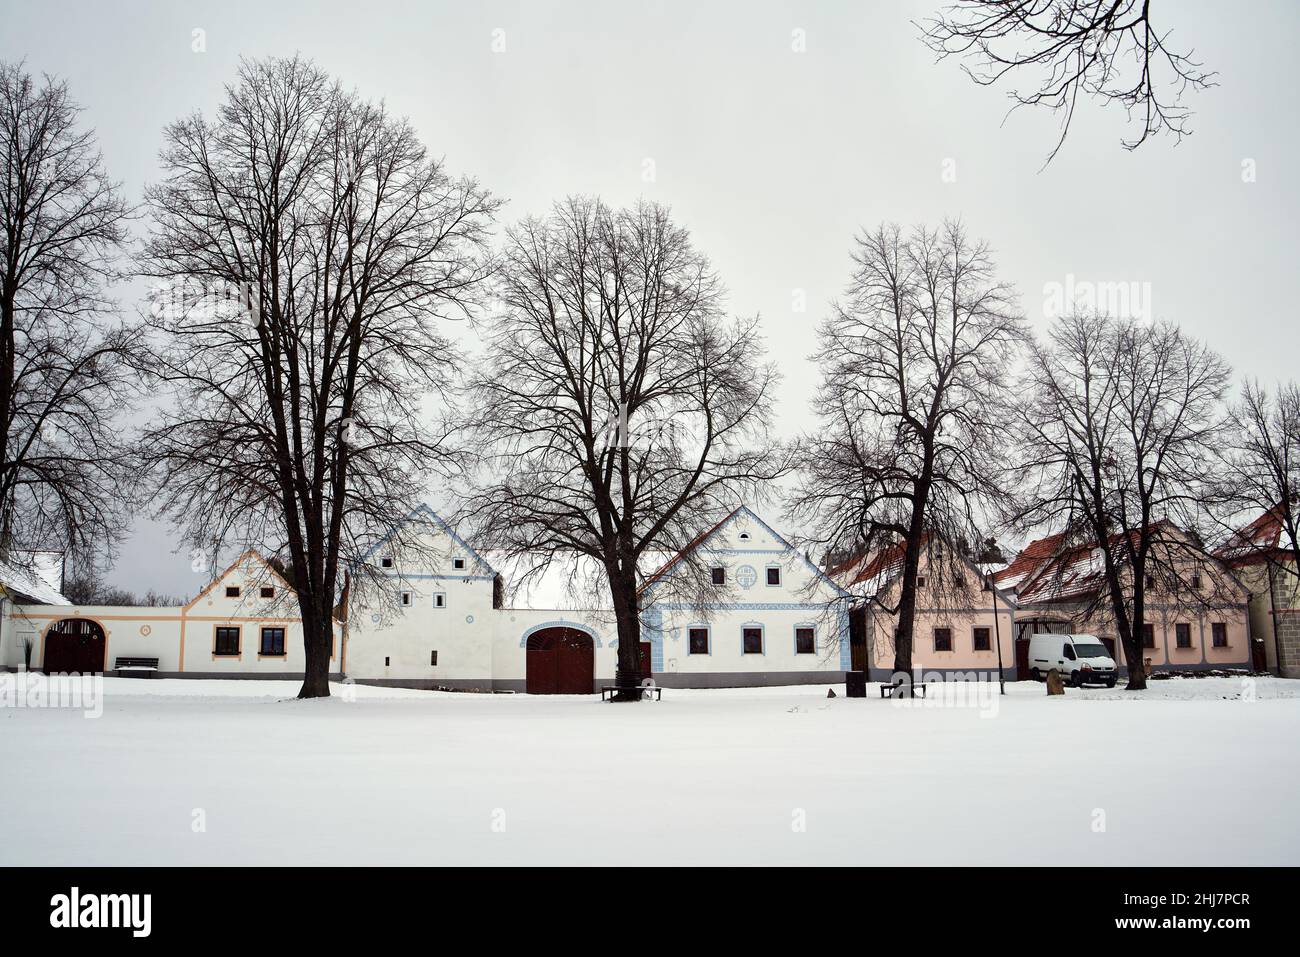 HOLASOVICE, CZECH REPUBLIC - JANUARY 21, 2022: Picturesque houses in rural baroque style in South Bohemia registered as UNESCO world heritage site Stock Photo